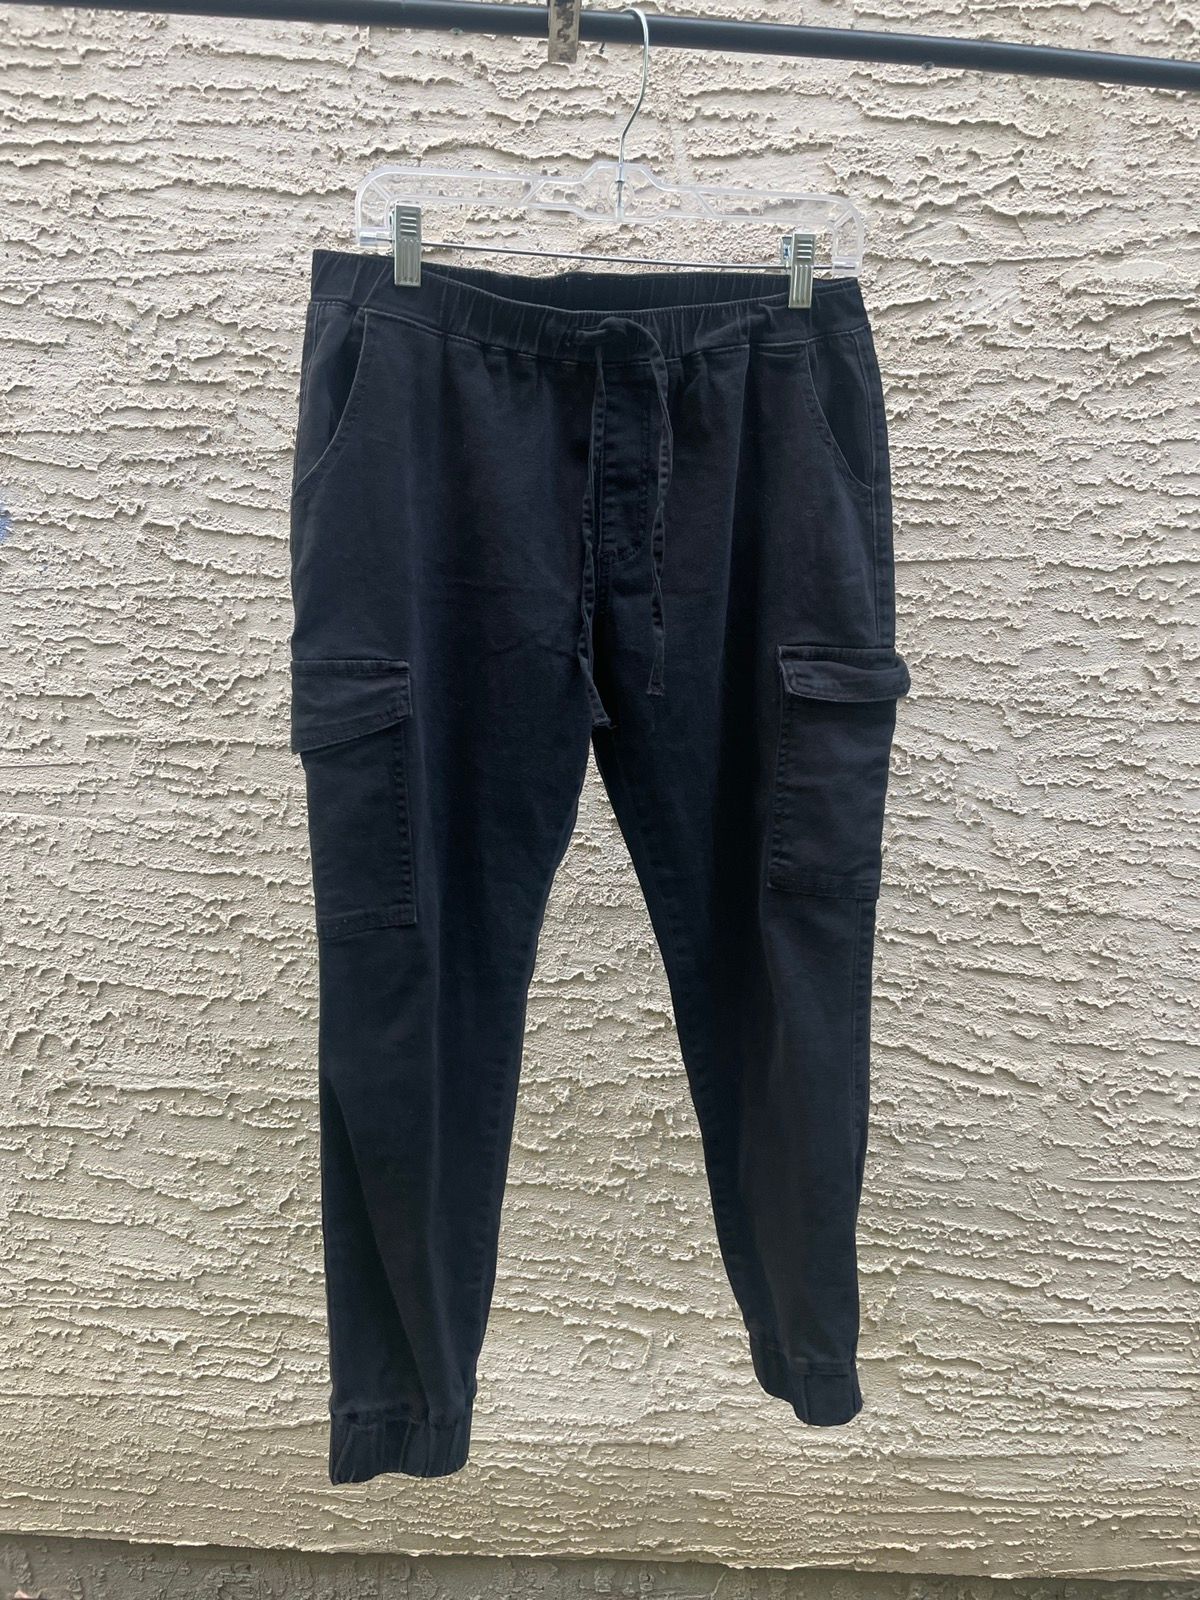 Vintage Almost Famous Cargo Style Jogger Pants | Grailed